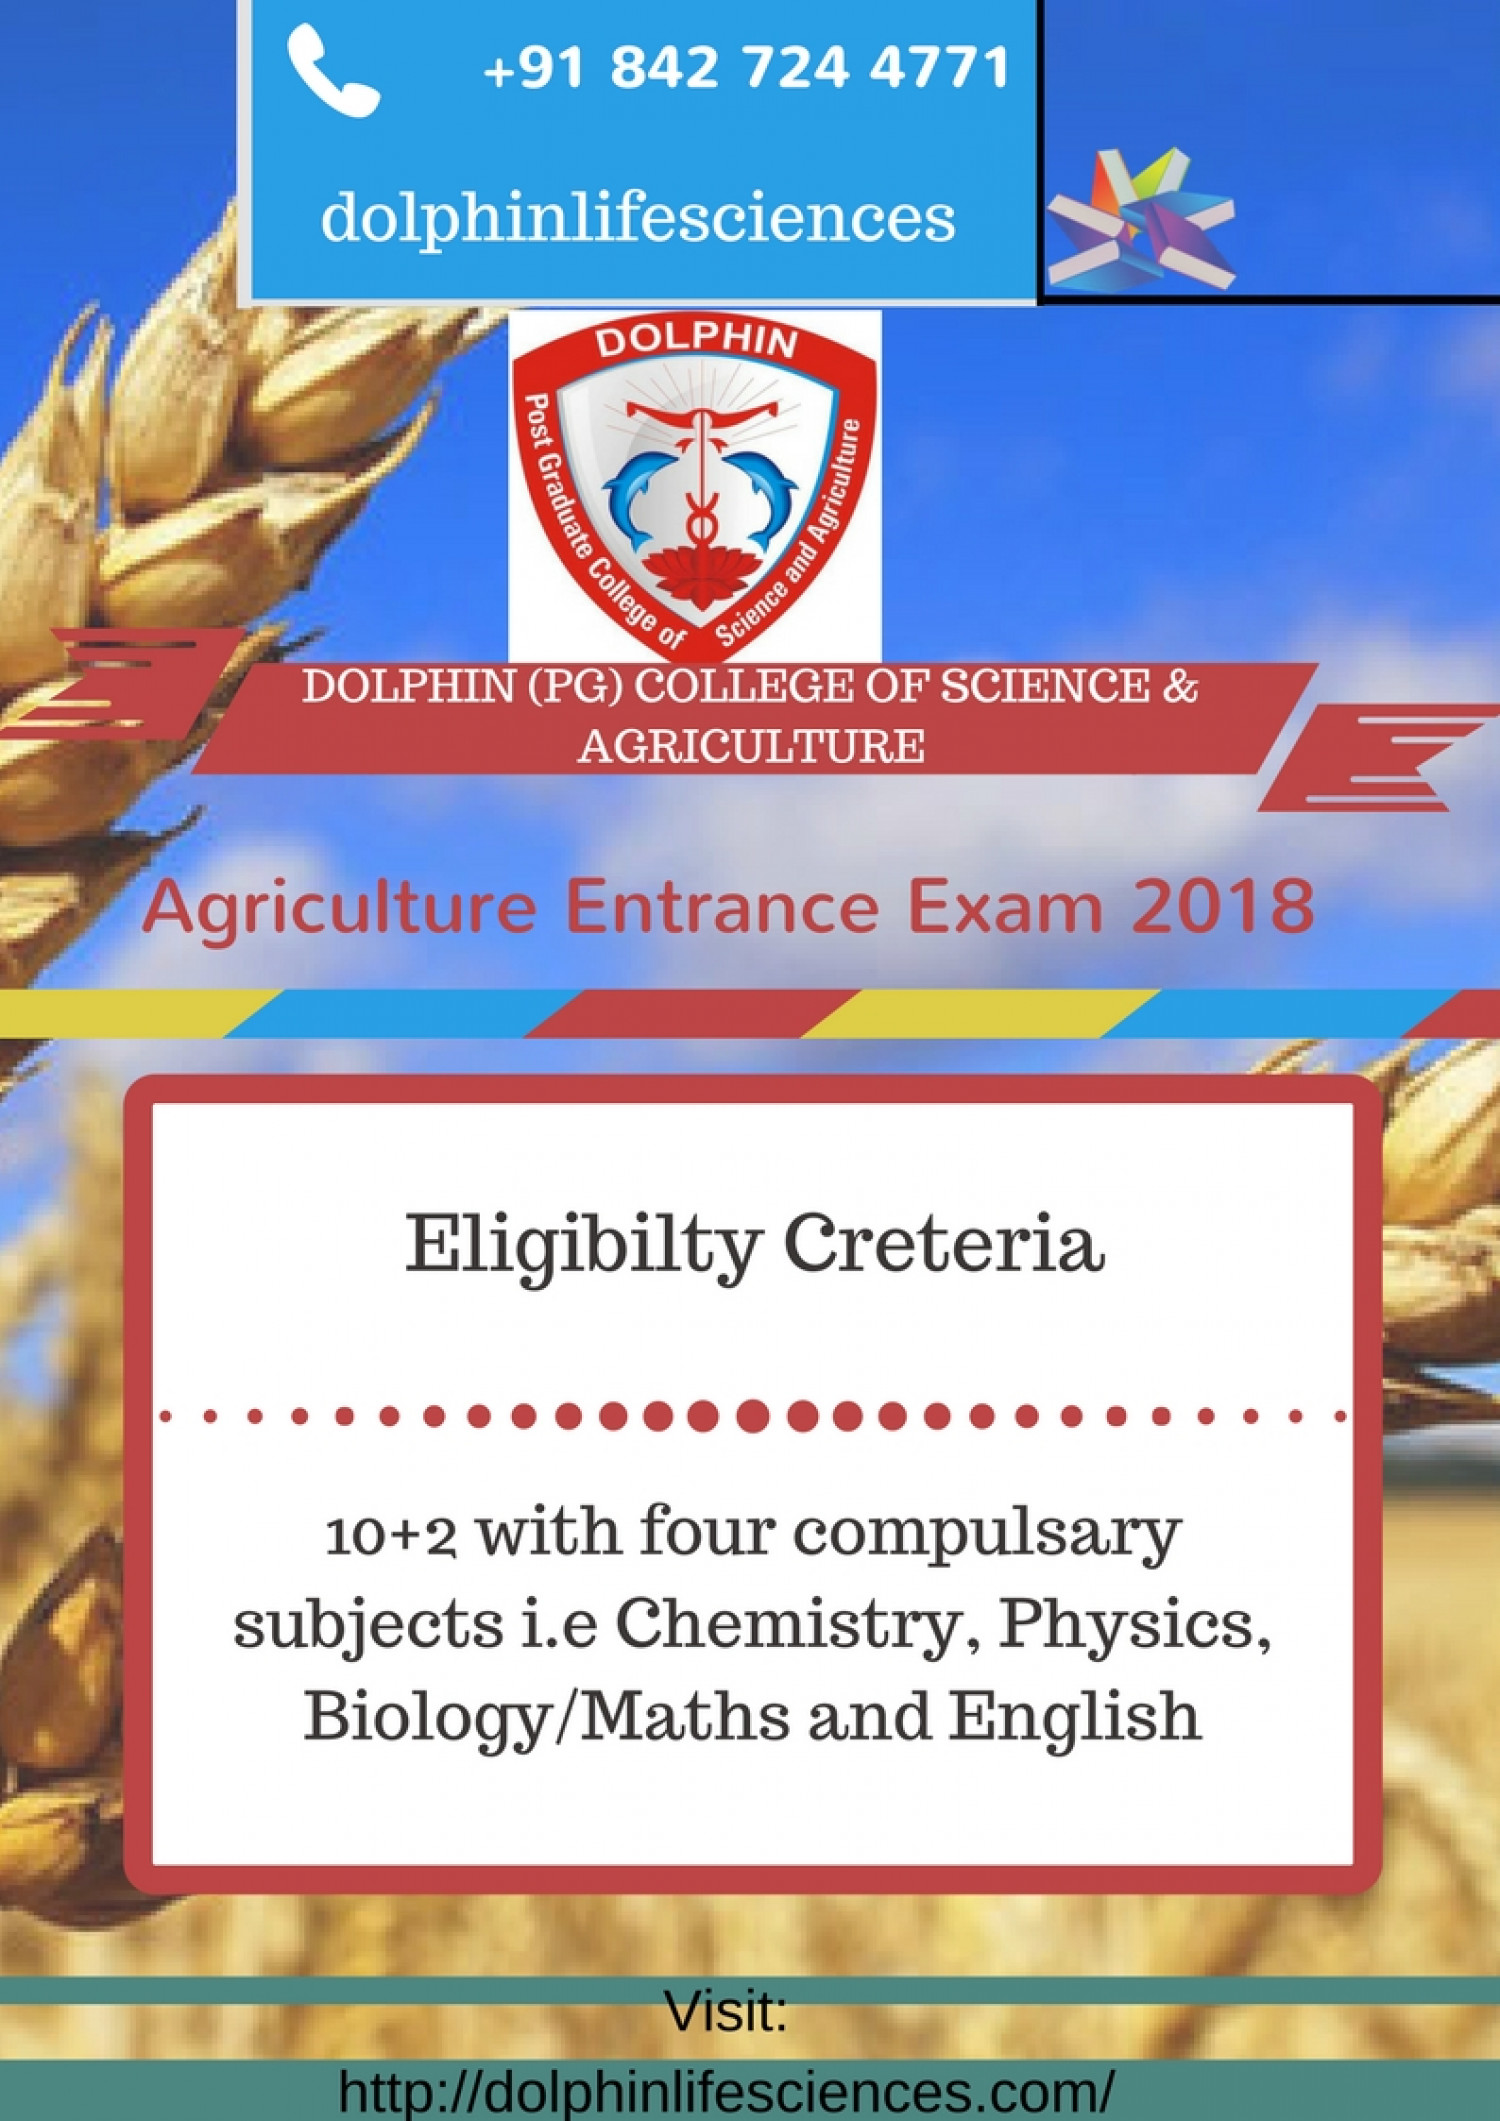 Agriculture Entrance Exam 2018 Infographic